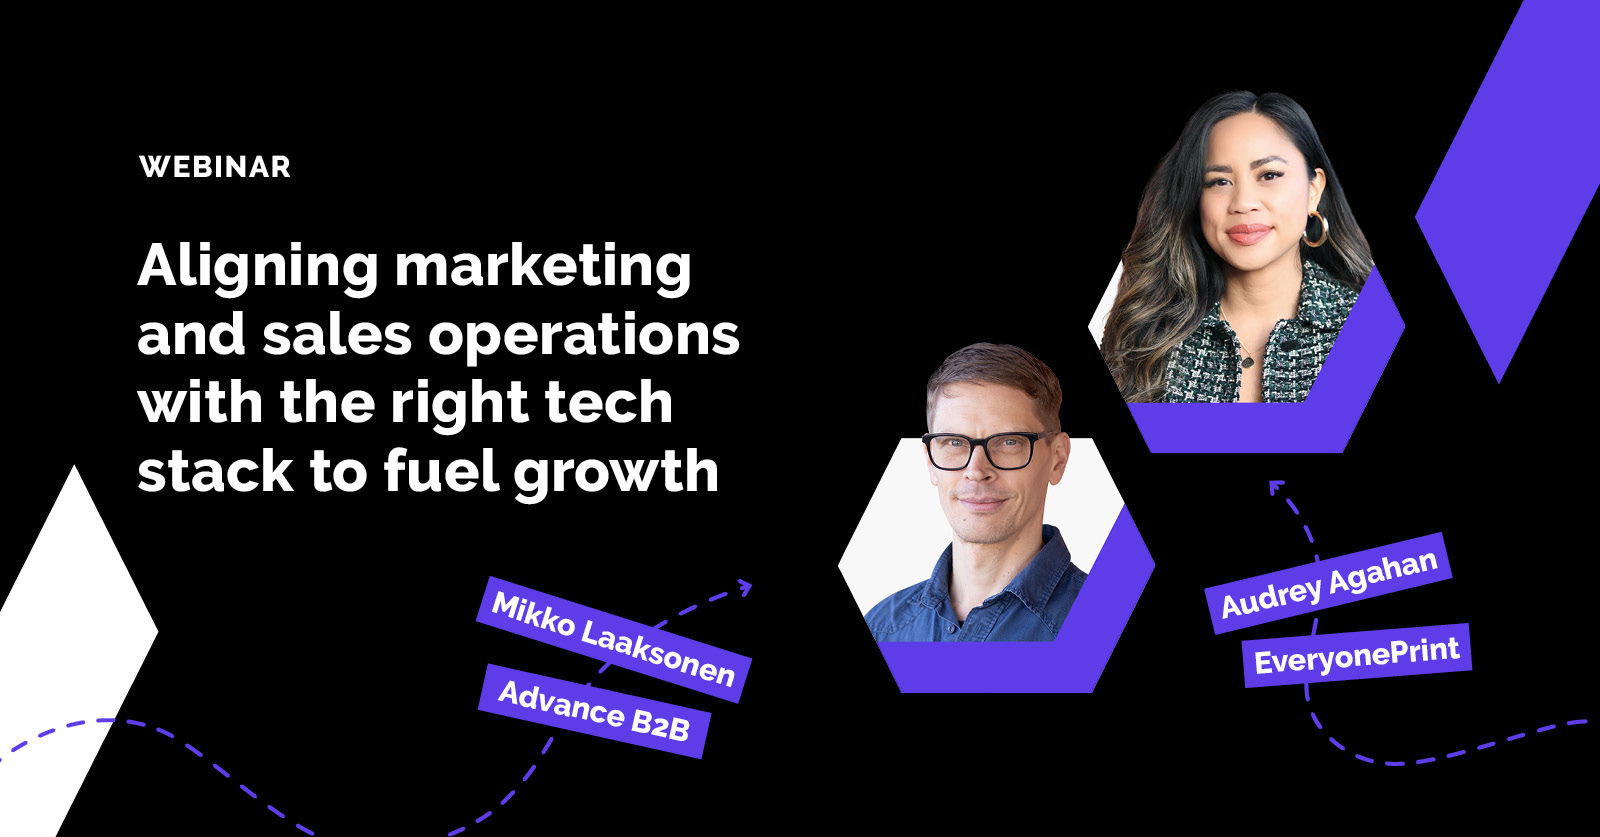 Aligning marketing and sales operations with the right tech stack to fuel growth